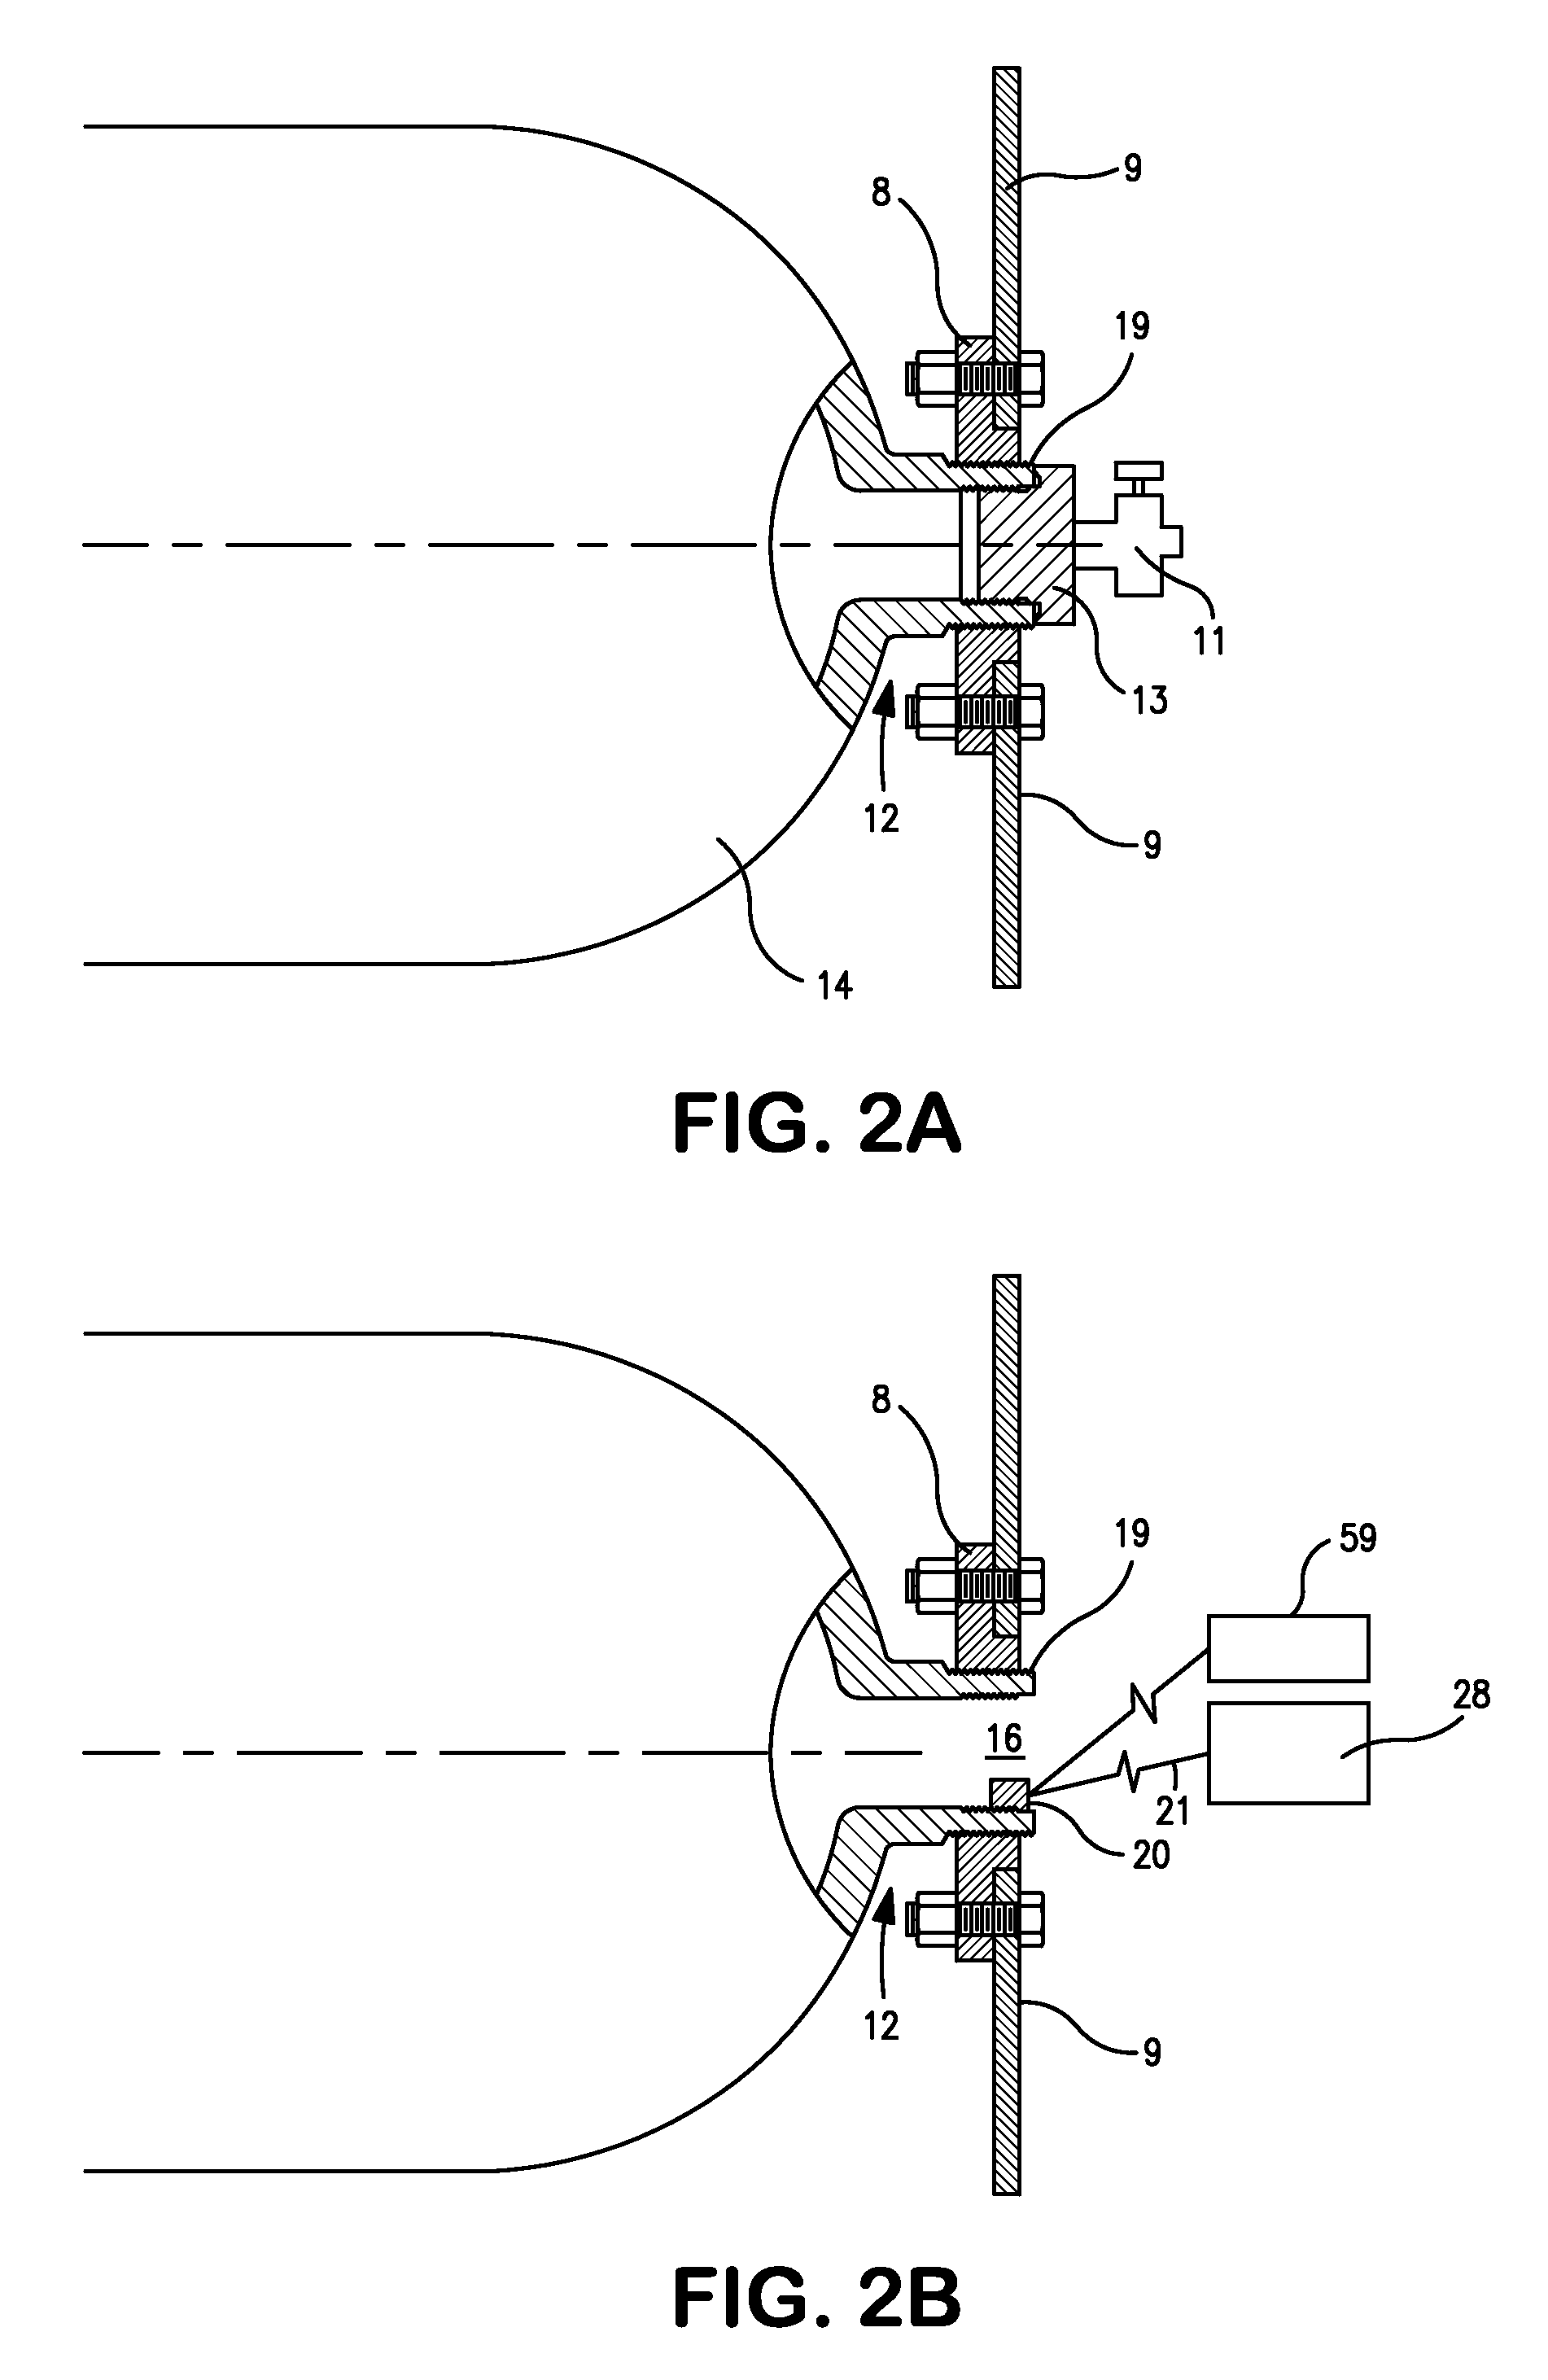 System and method for ultrasonic examination of threaded surfaces